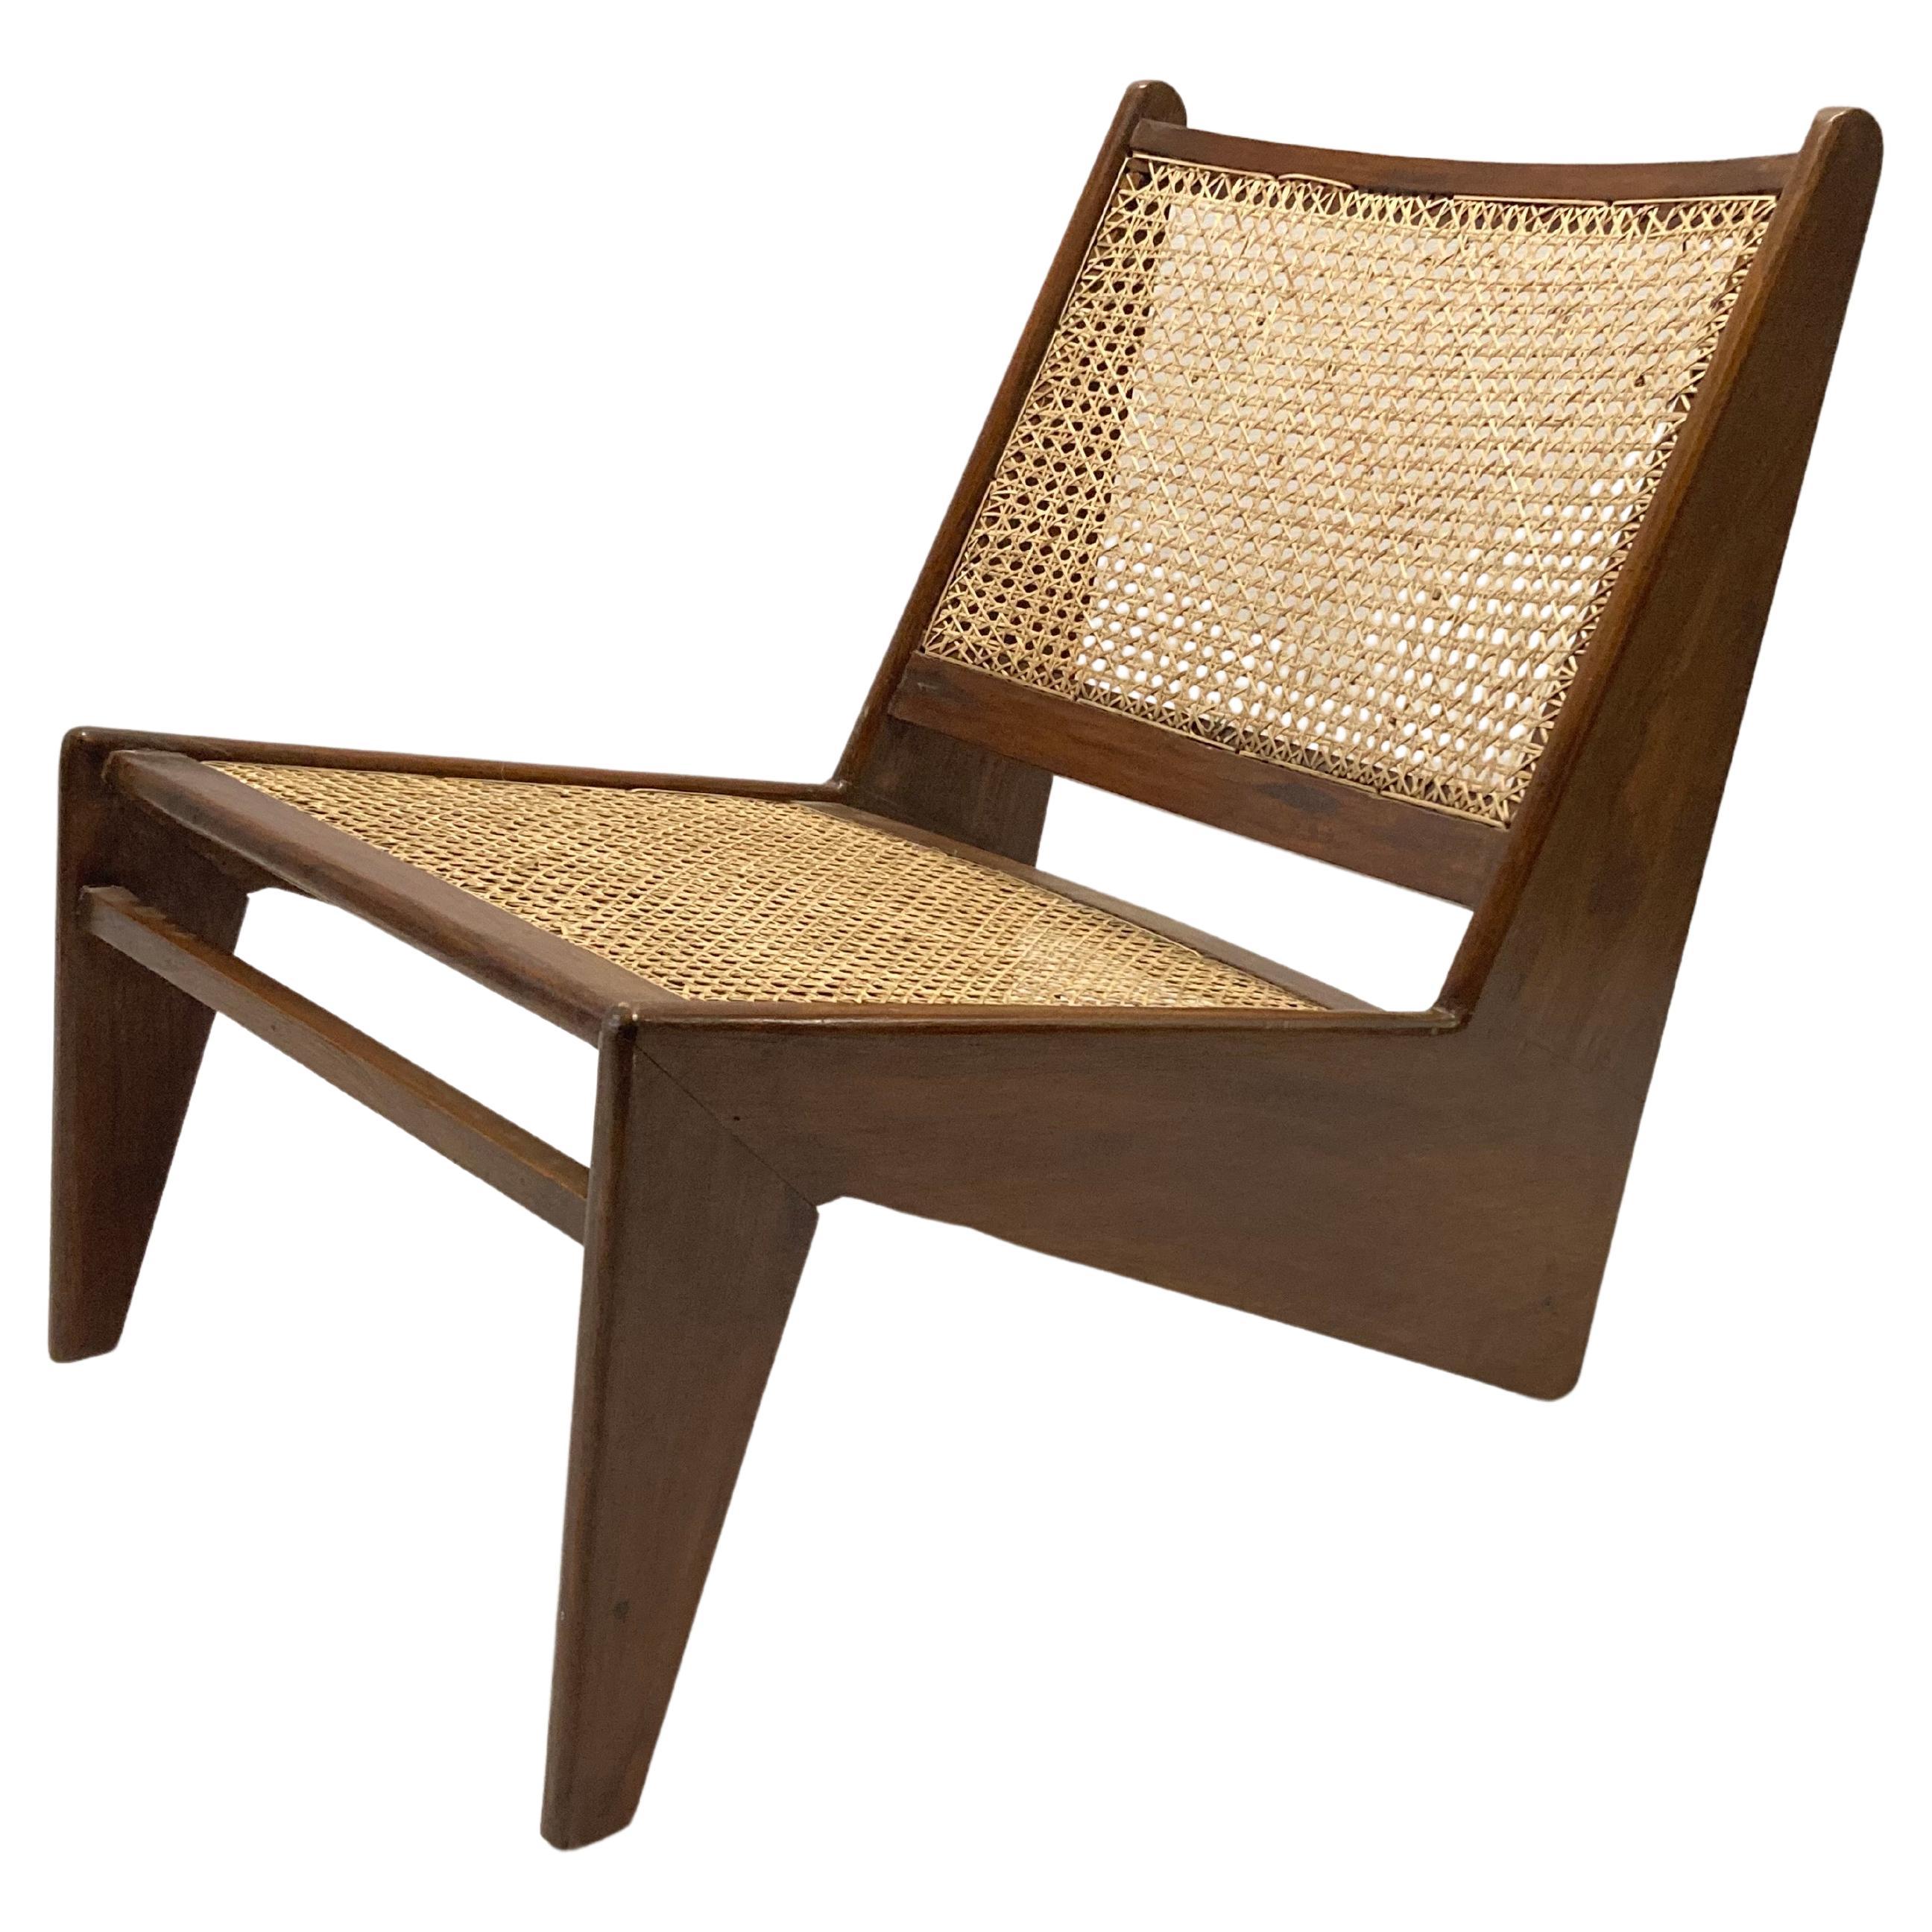 1950s Pierre Jeanneret 'Kangourou' Chandigarh Lounge Chair PJ-SI-59-A For Sale